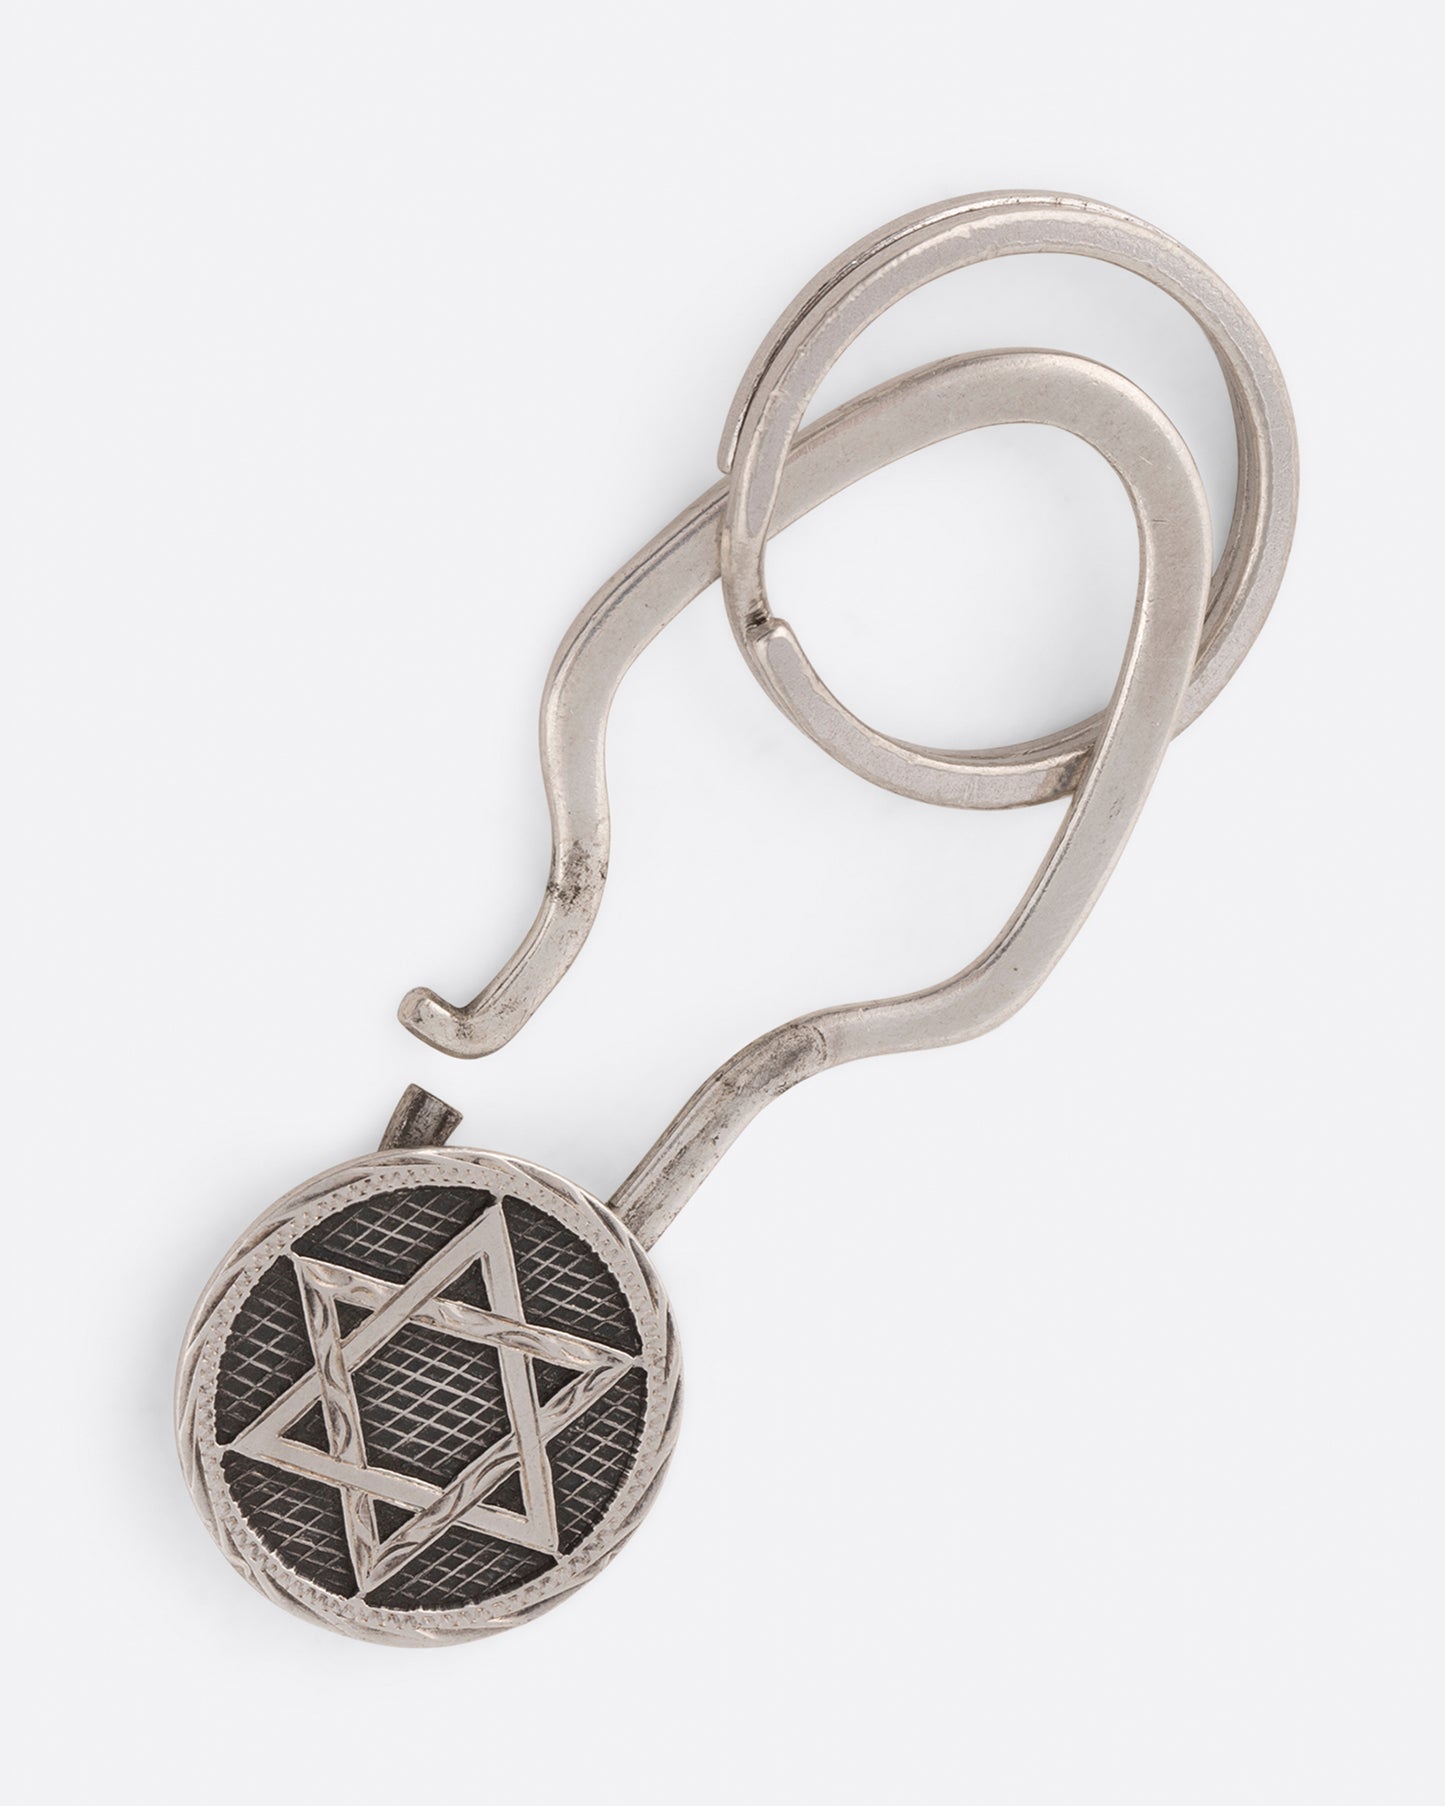 A Star of David key chain with crosshatching texture that offers both a key ring and a hook closure.